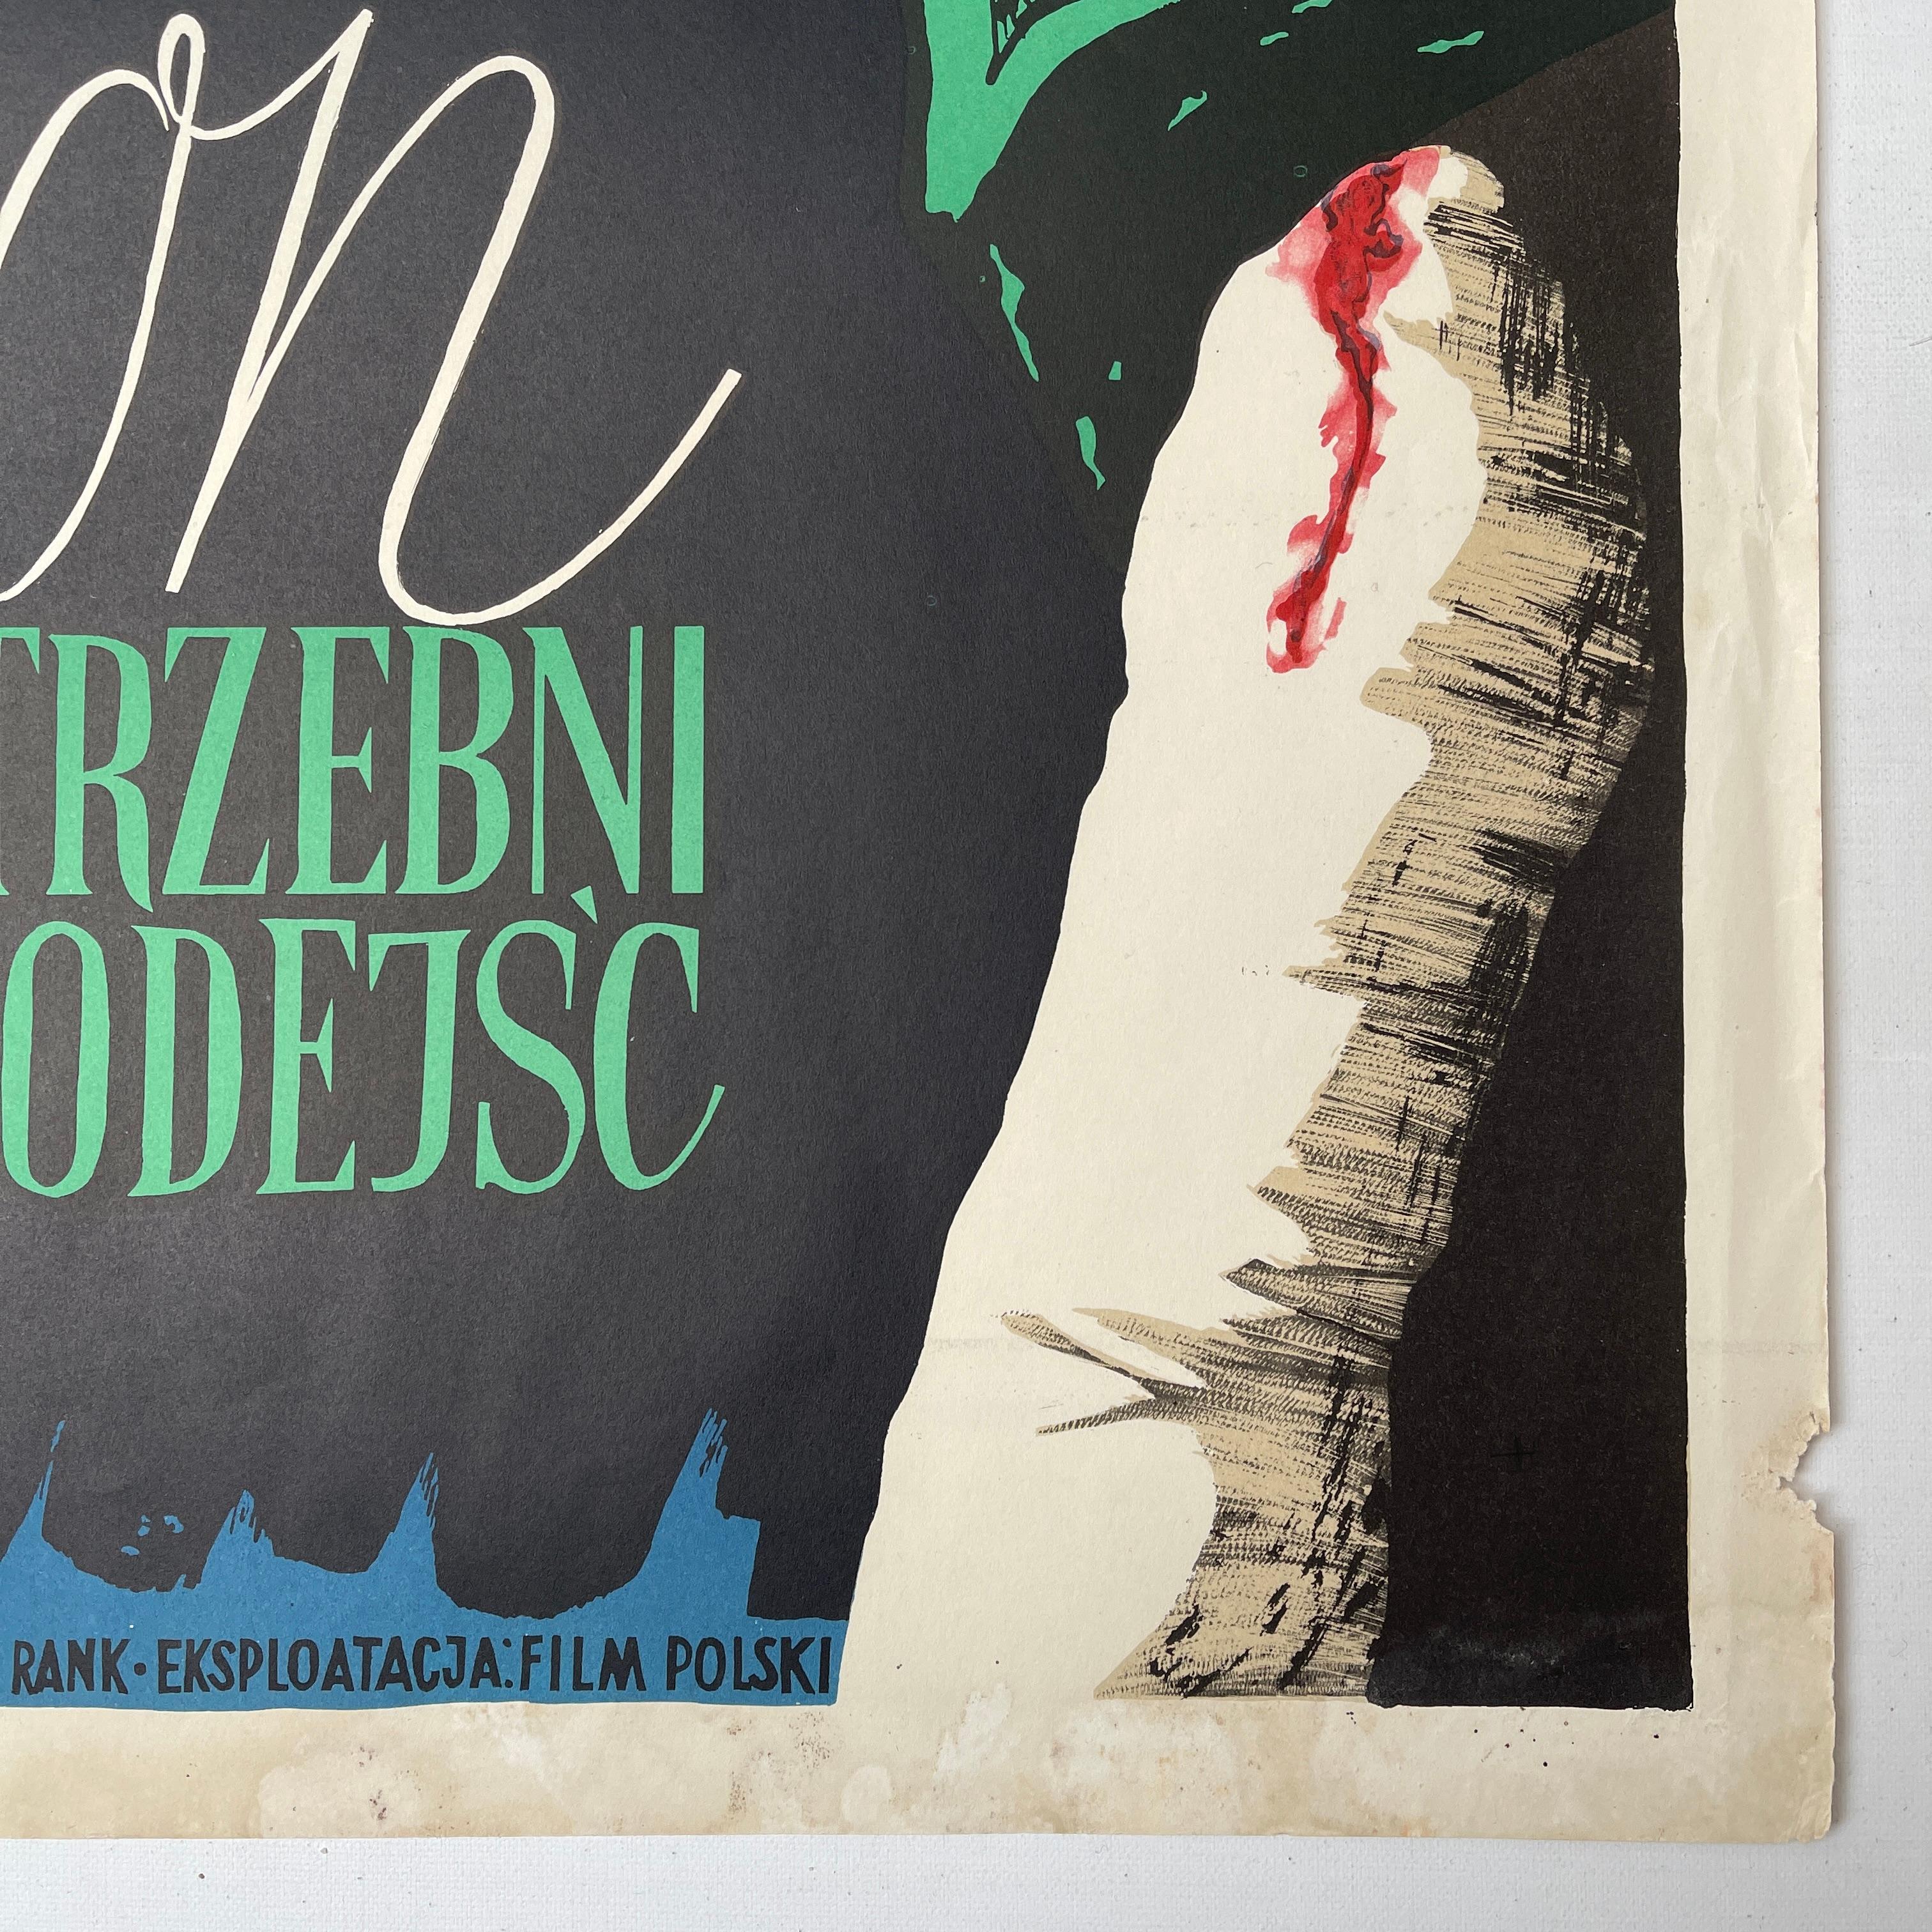 This is an extremely special and very rare Polish film poster. It is a 20th century design classic, created by the founding father of the Polish School of Posters - Professor Henryk Tomaszewski.

Tomaszewski first designed this poster in 1947 for